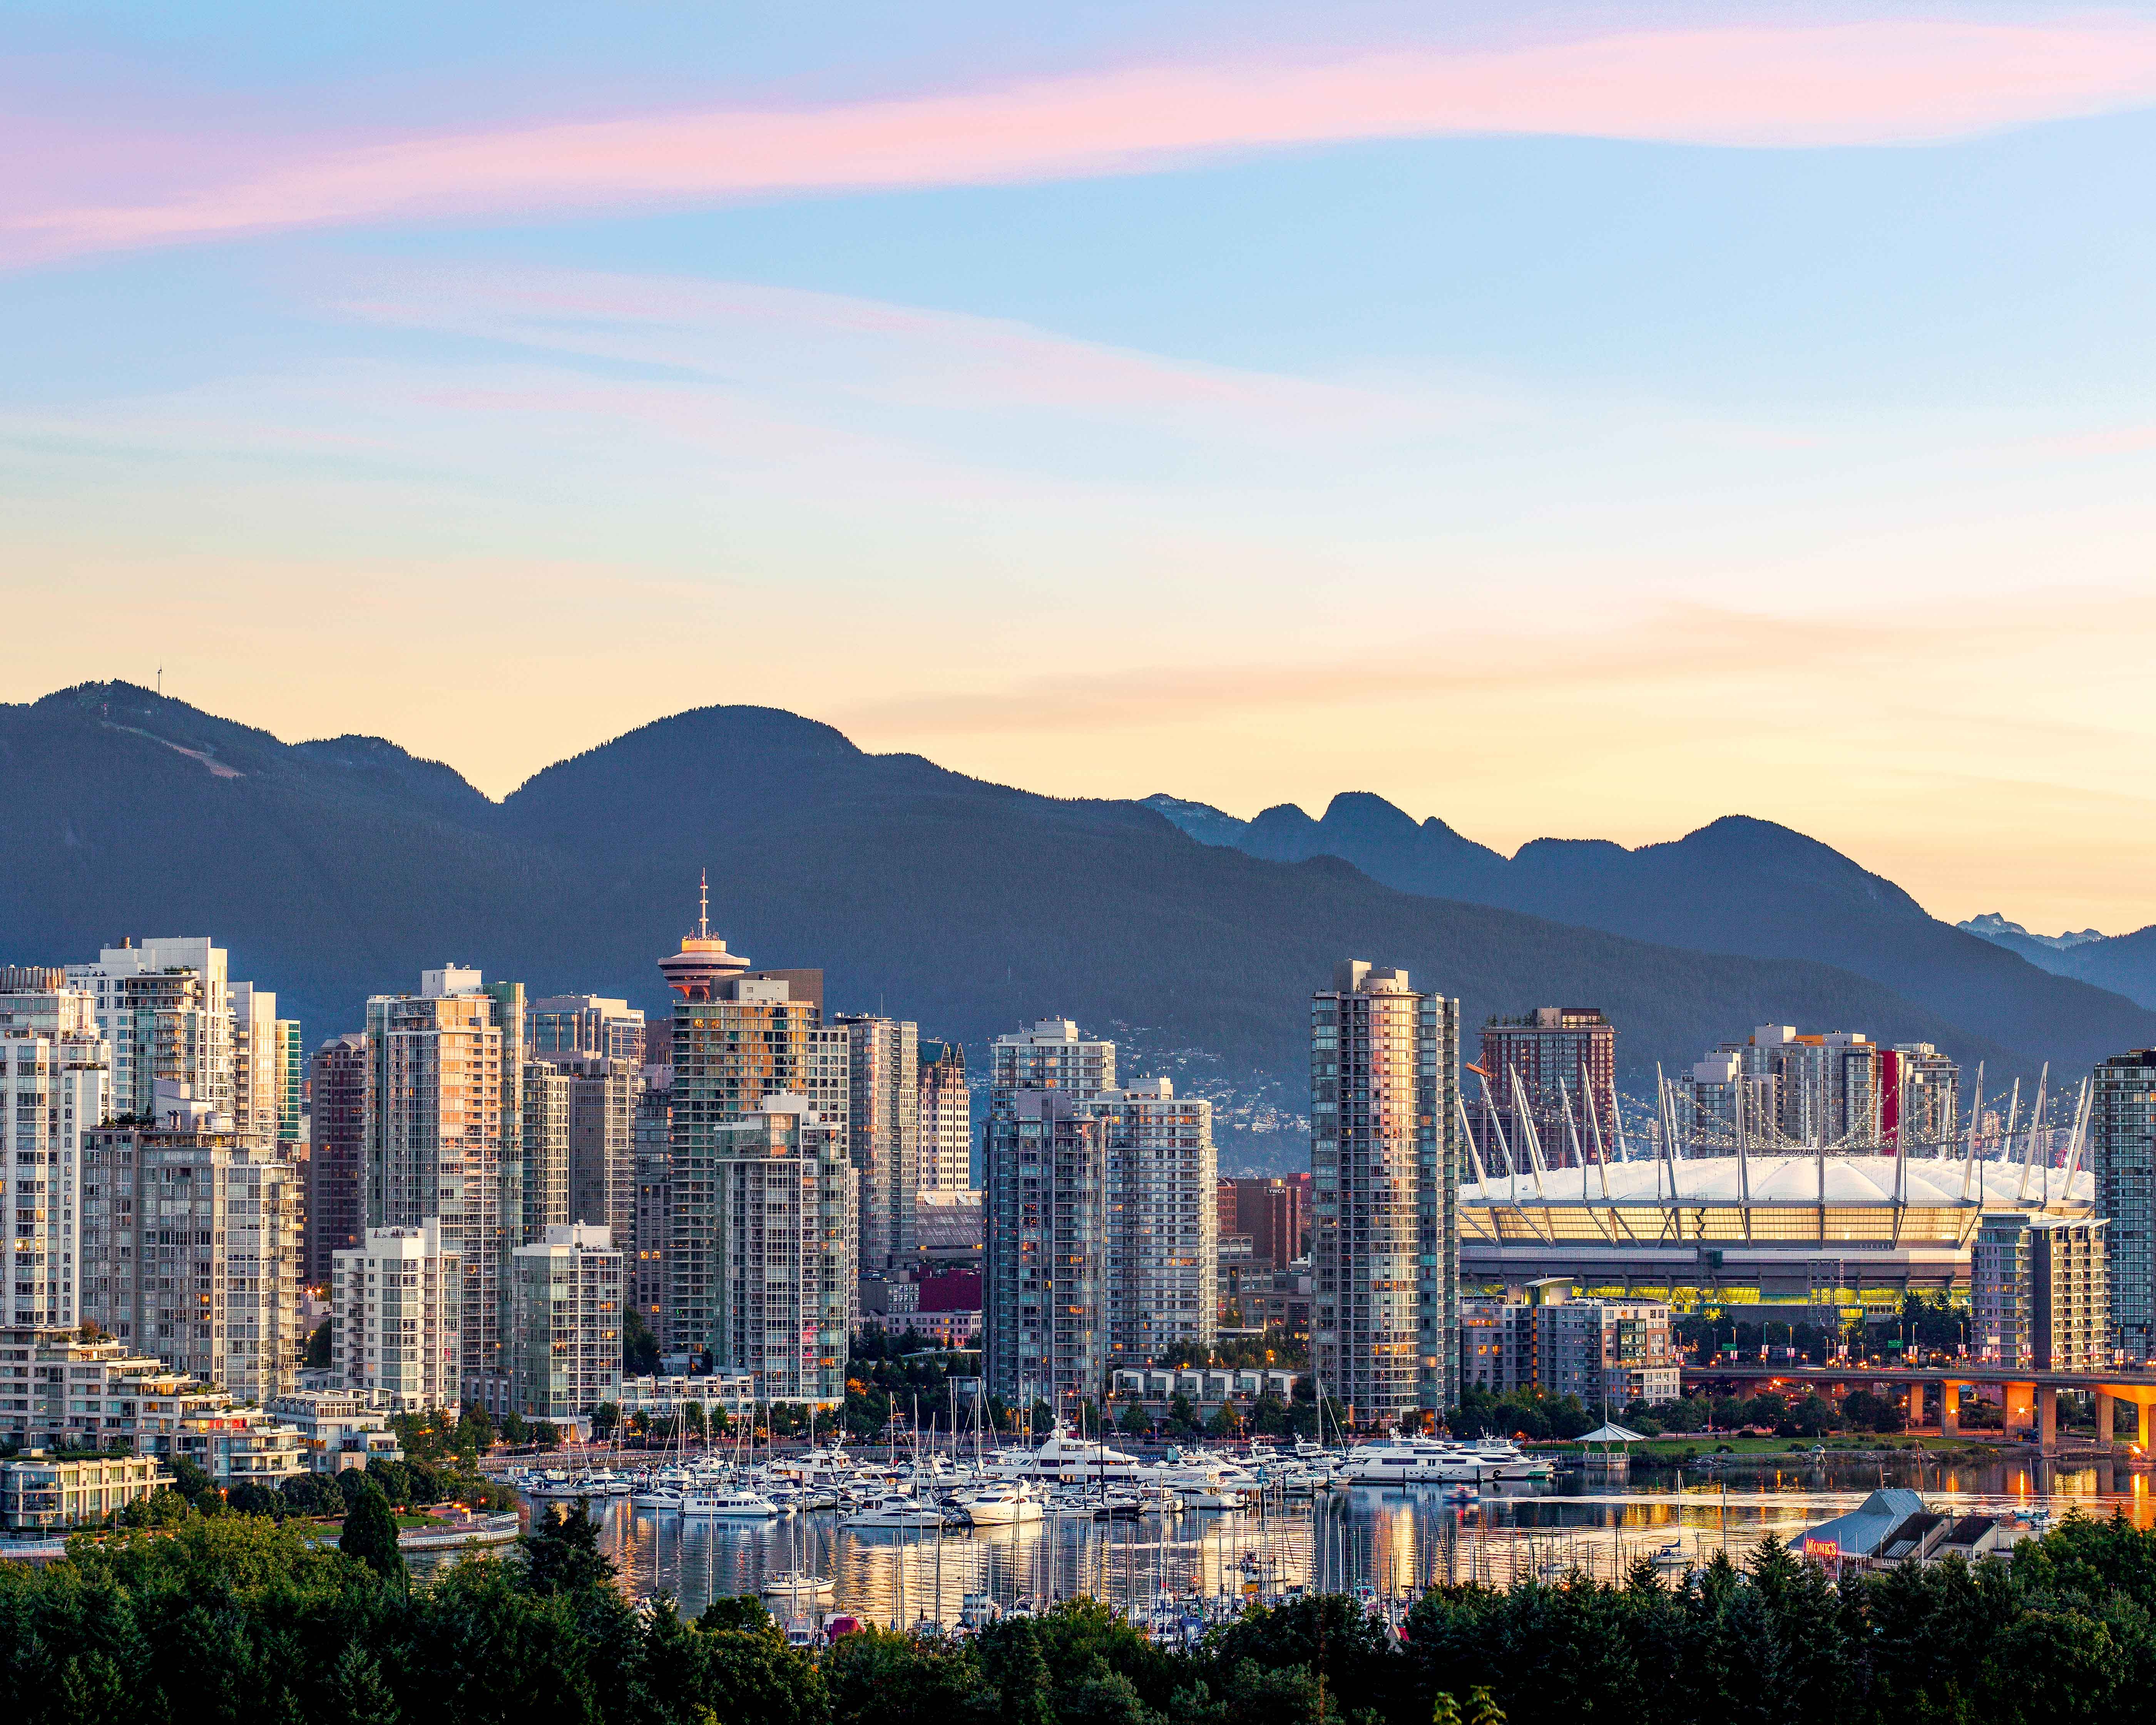 Vancouver vacations: BC Place and the Vancouver skyline at sunset.